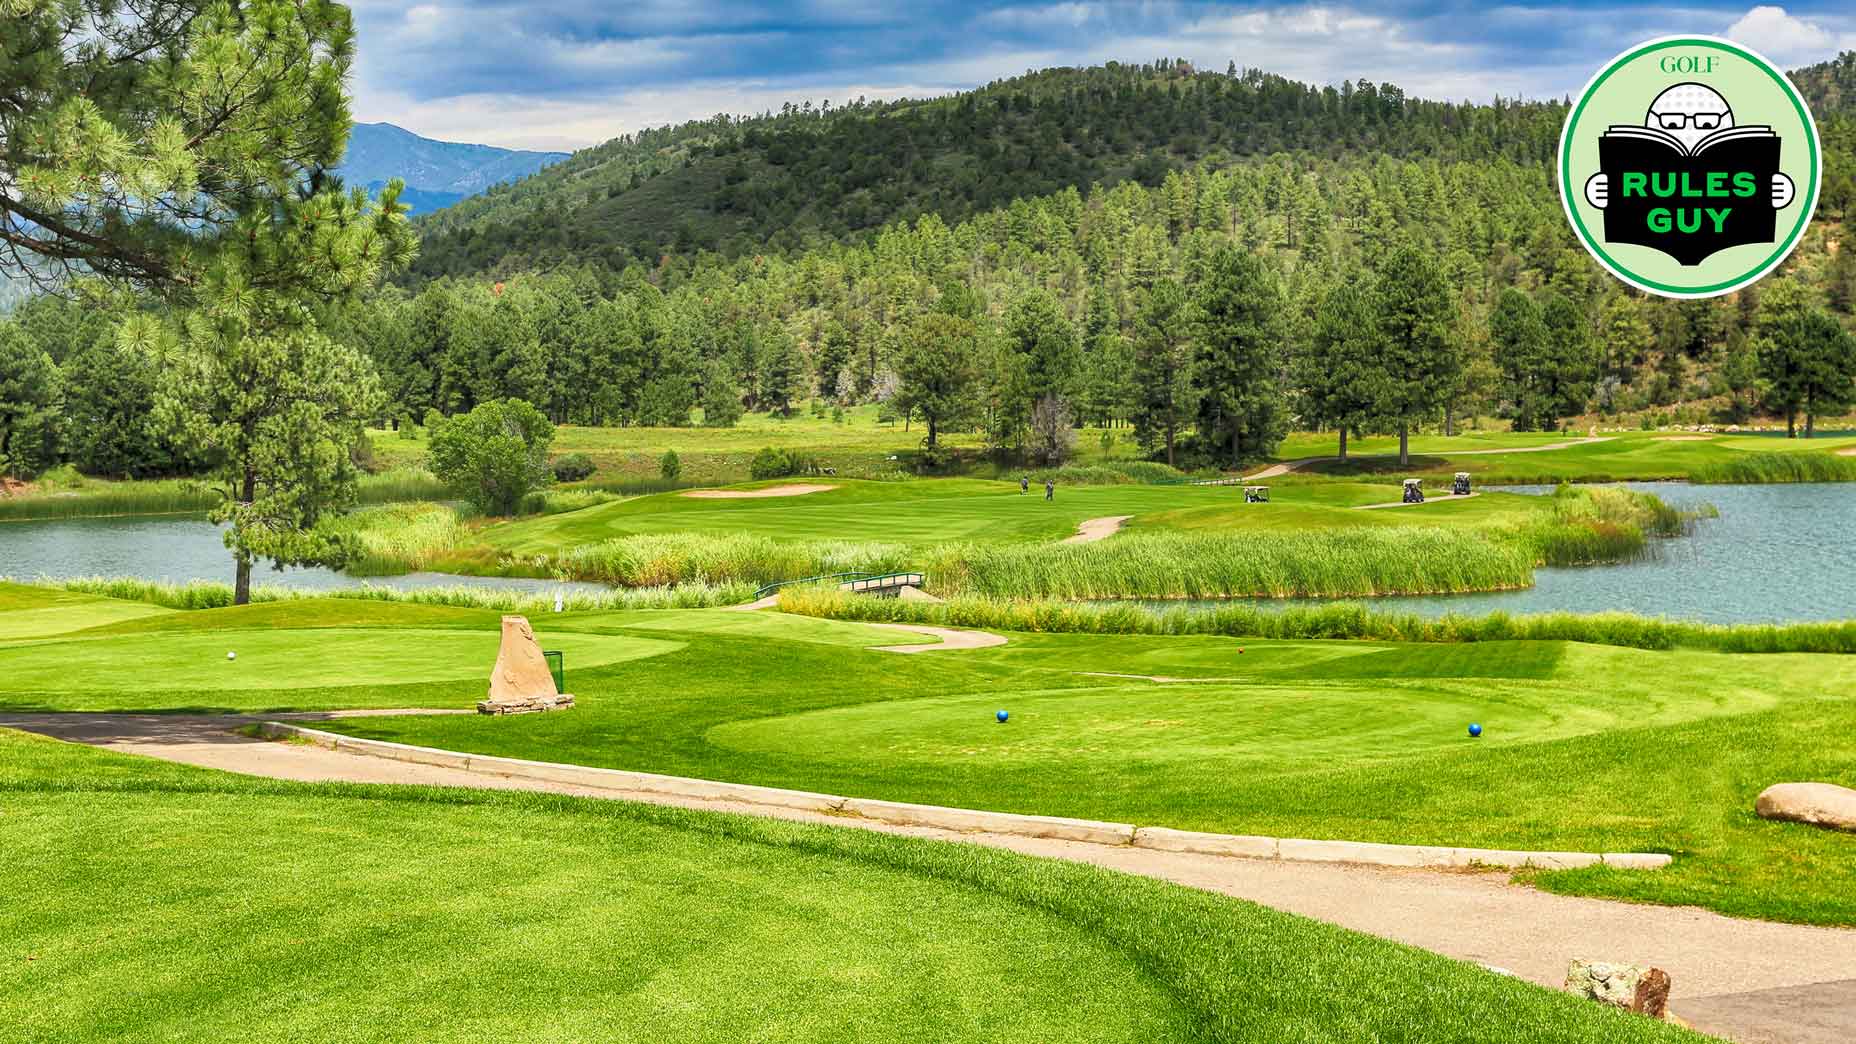 Mountain resort, golf courses- the most spectacular golf courses in the country. HDR image.